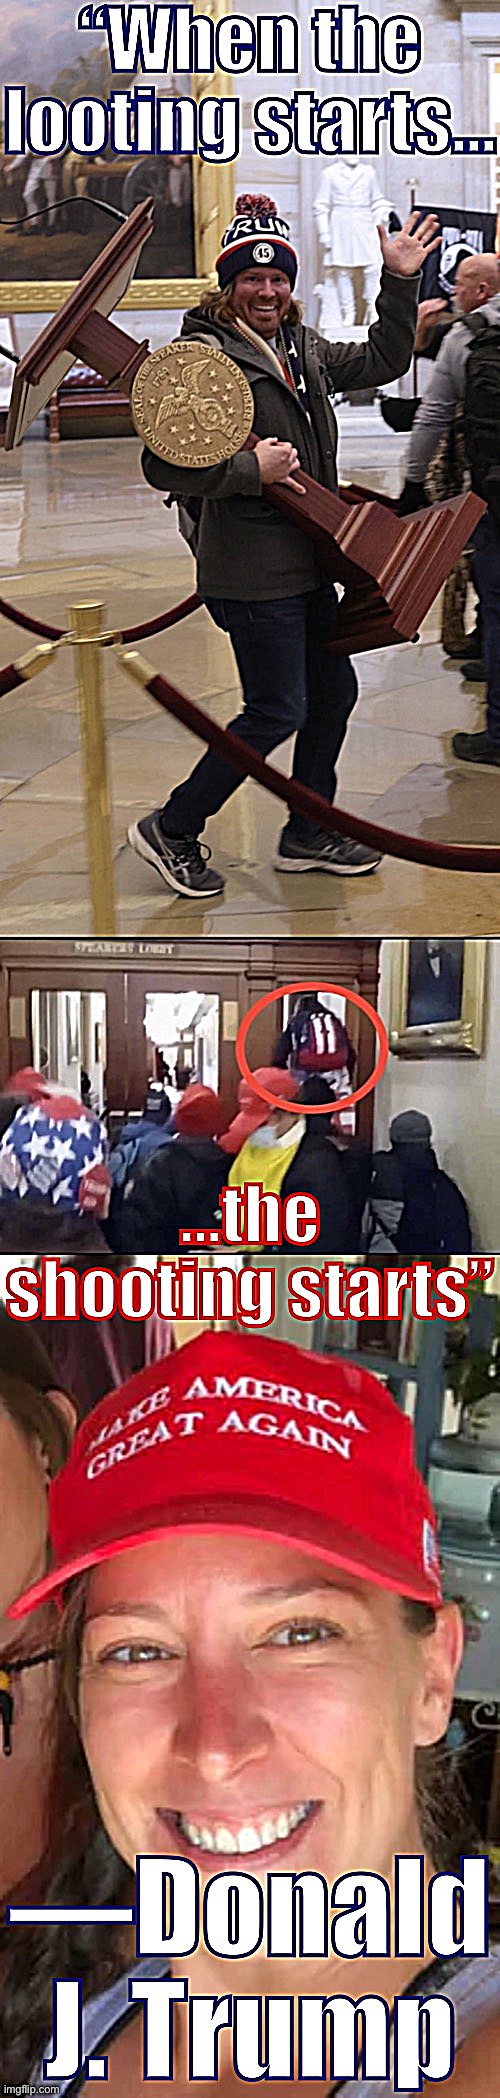 MAGA riot when the looting starts the shooting starts | image tagged in maga riot when the looting starts the shooting starts | made w/ Imgflip meme maker